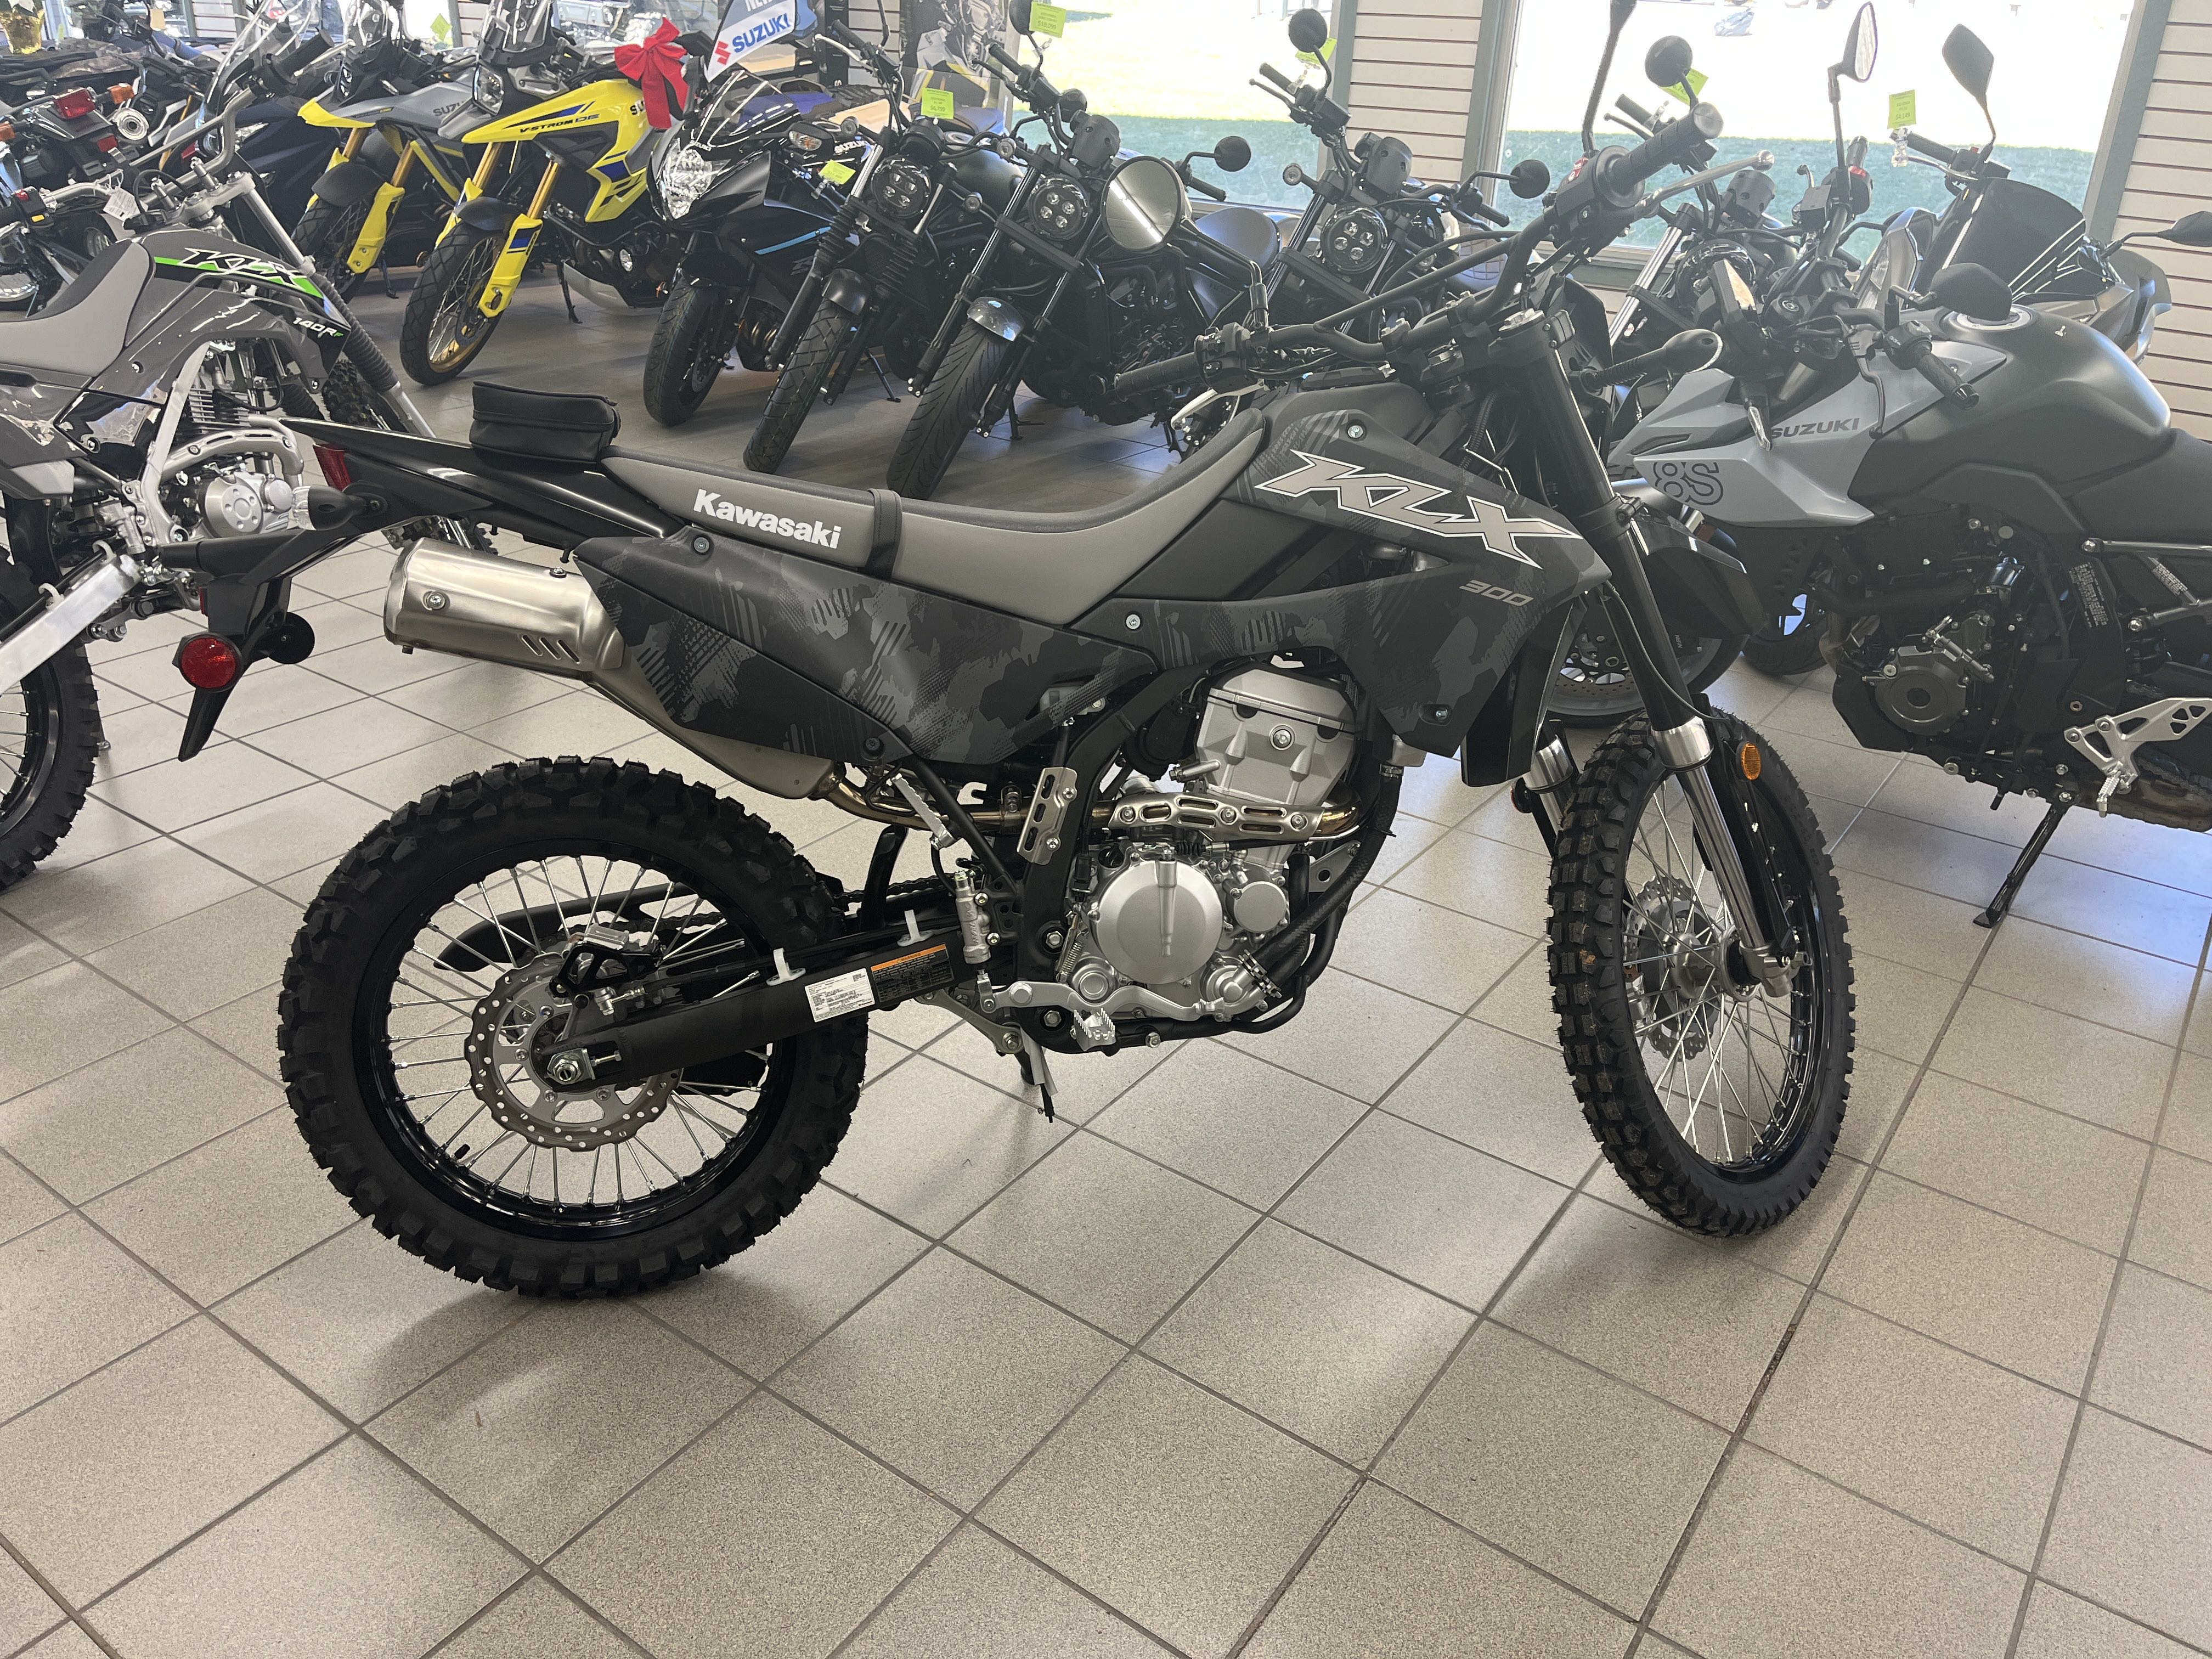 New & Used Powersports Inventory | Waynesville Cycle Center